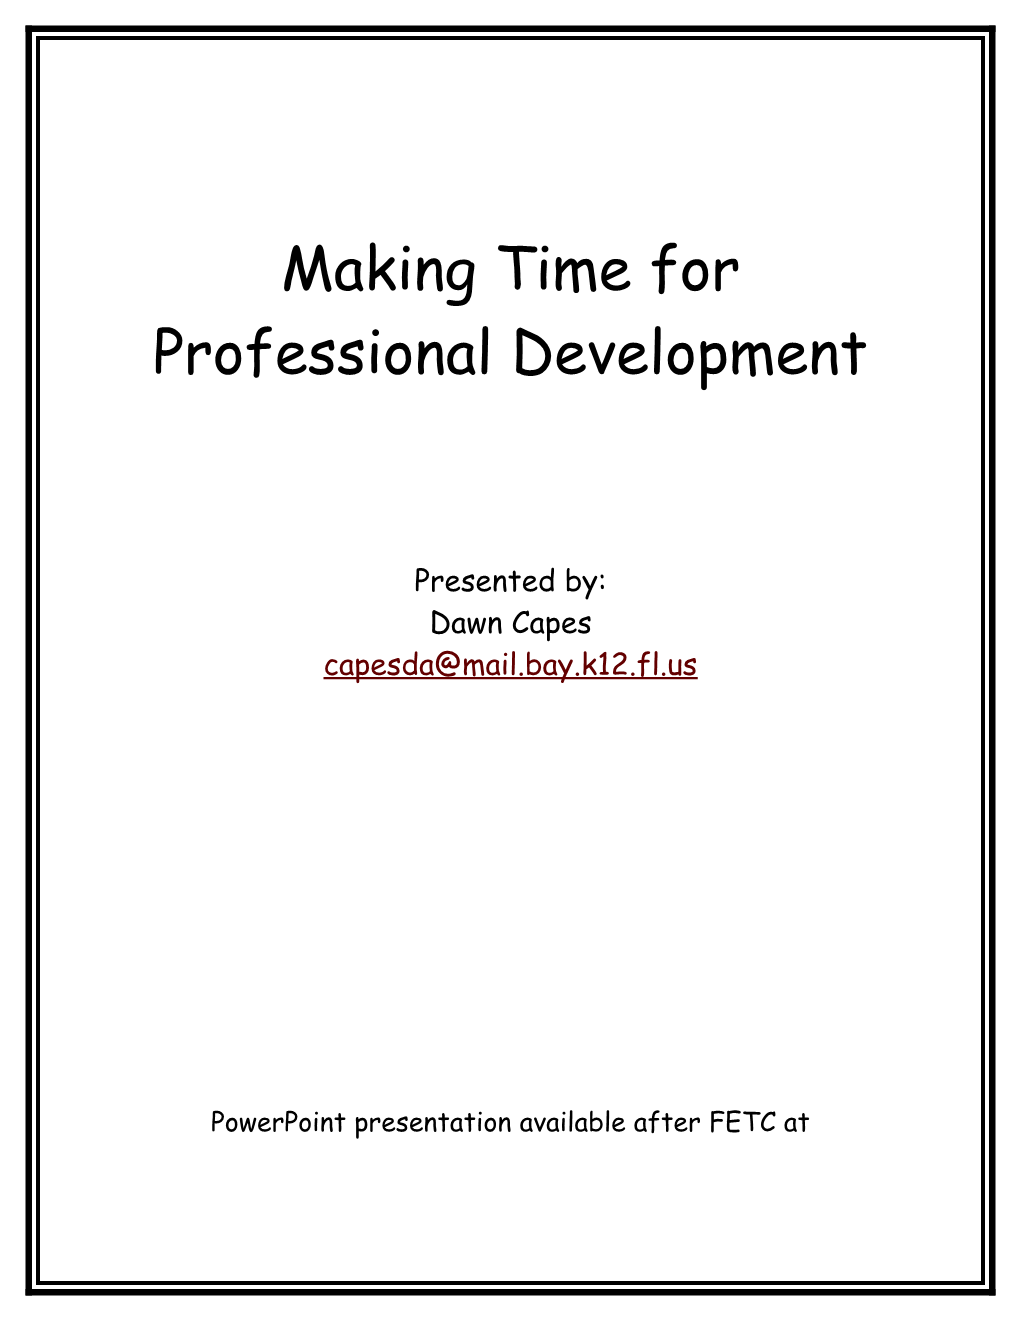 Making Time for Professional Development